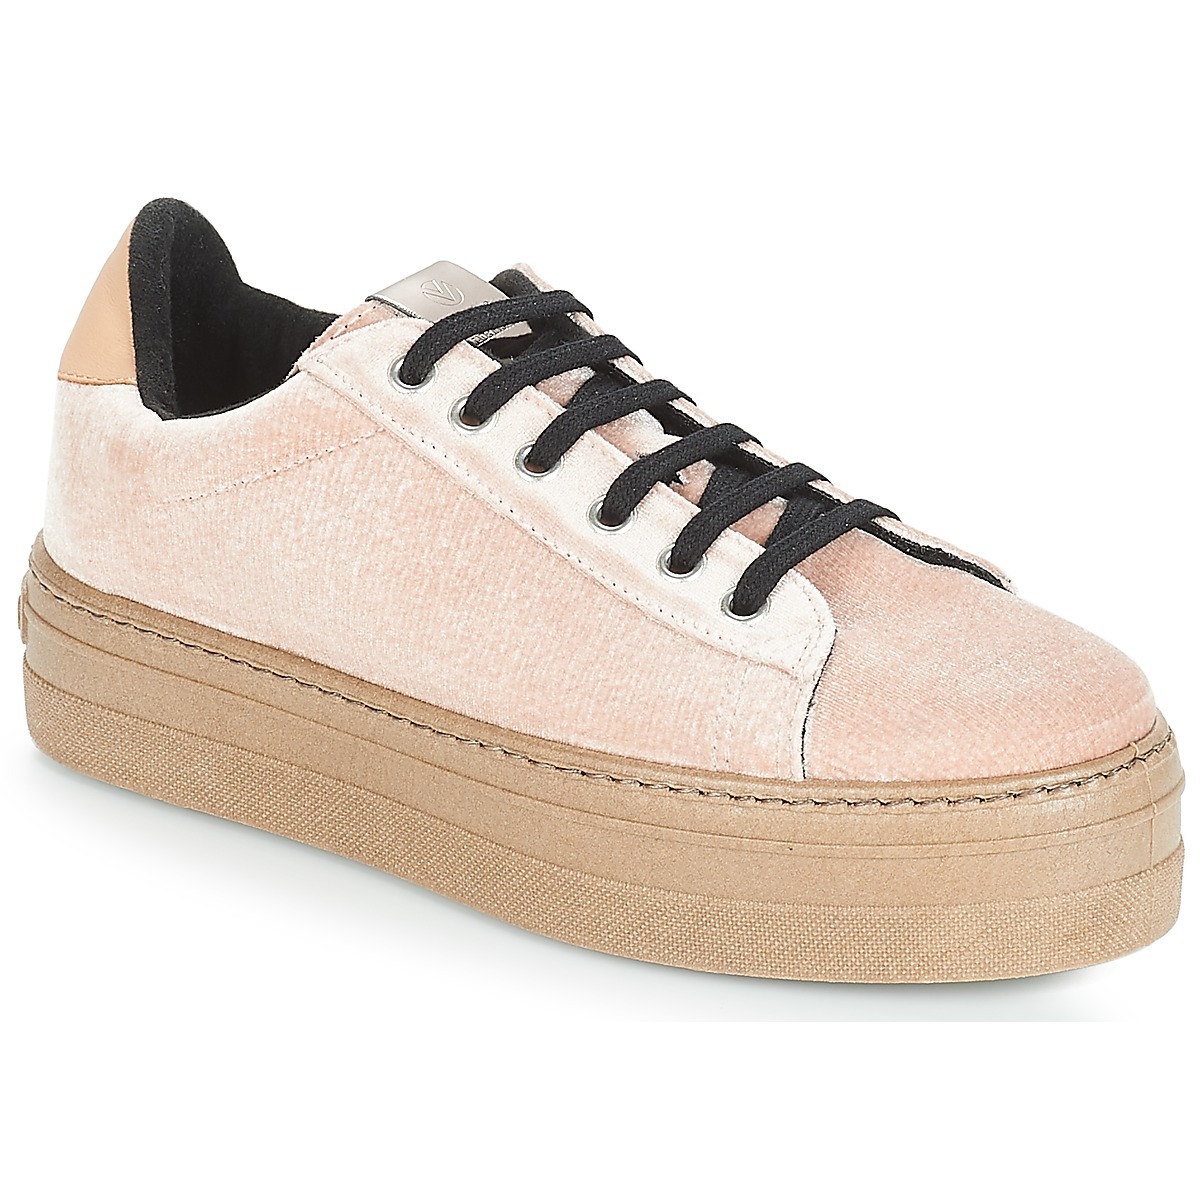 Spartoo Sneakers in Beige for Women from Victoria GOOFASH